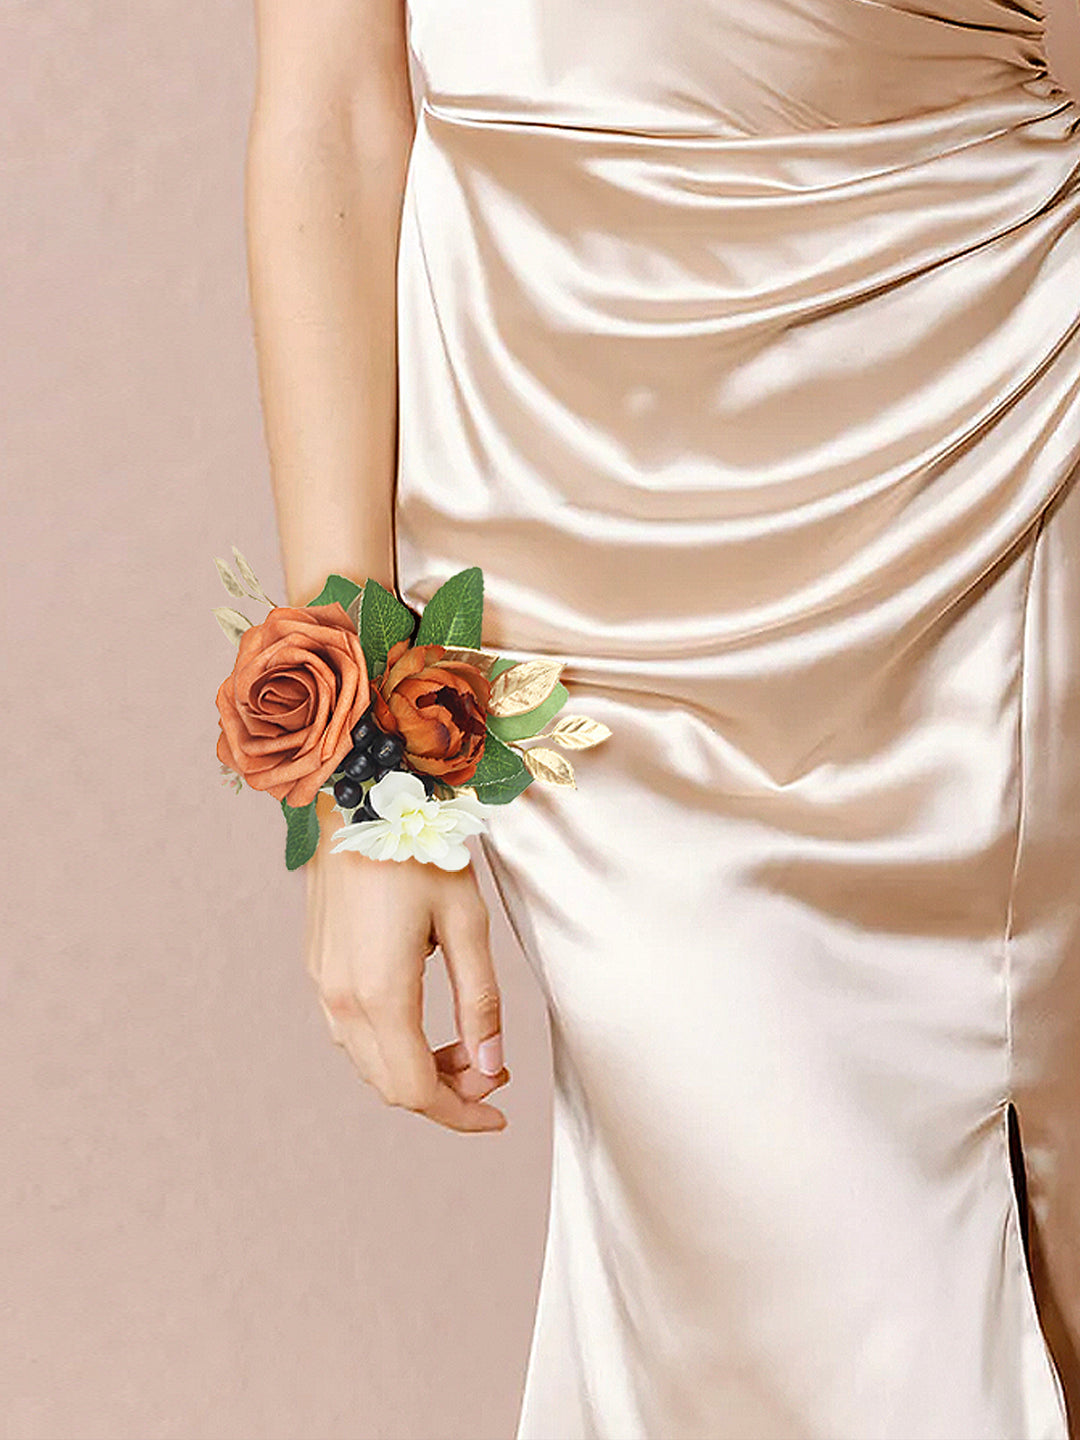 Why Wrist Corsages Are a Must-Have for Modern Weddings? - Rinlong Flower